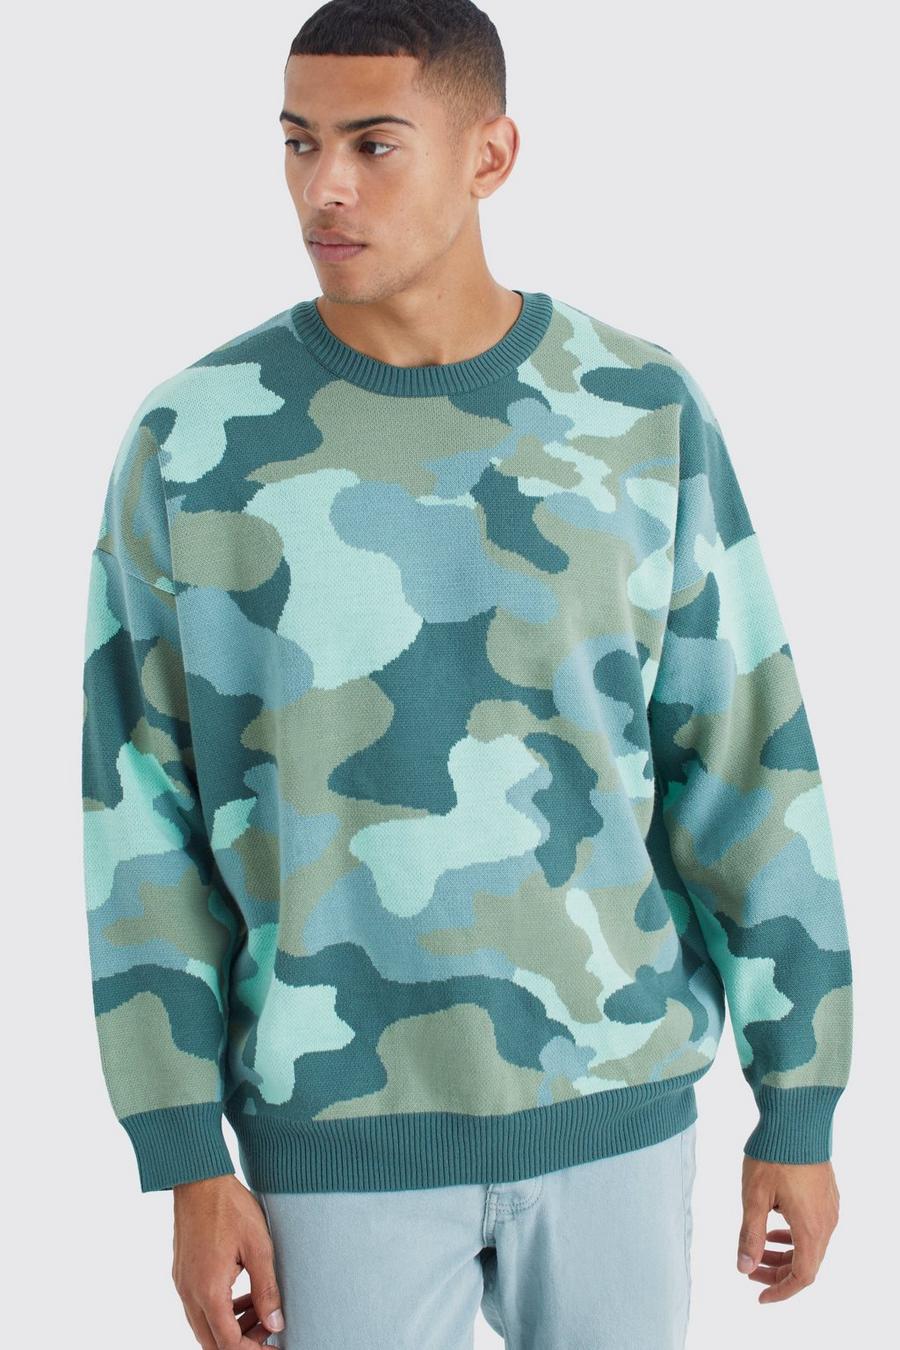 Teal Oversized Camo Print Distresed Knit Jumper